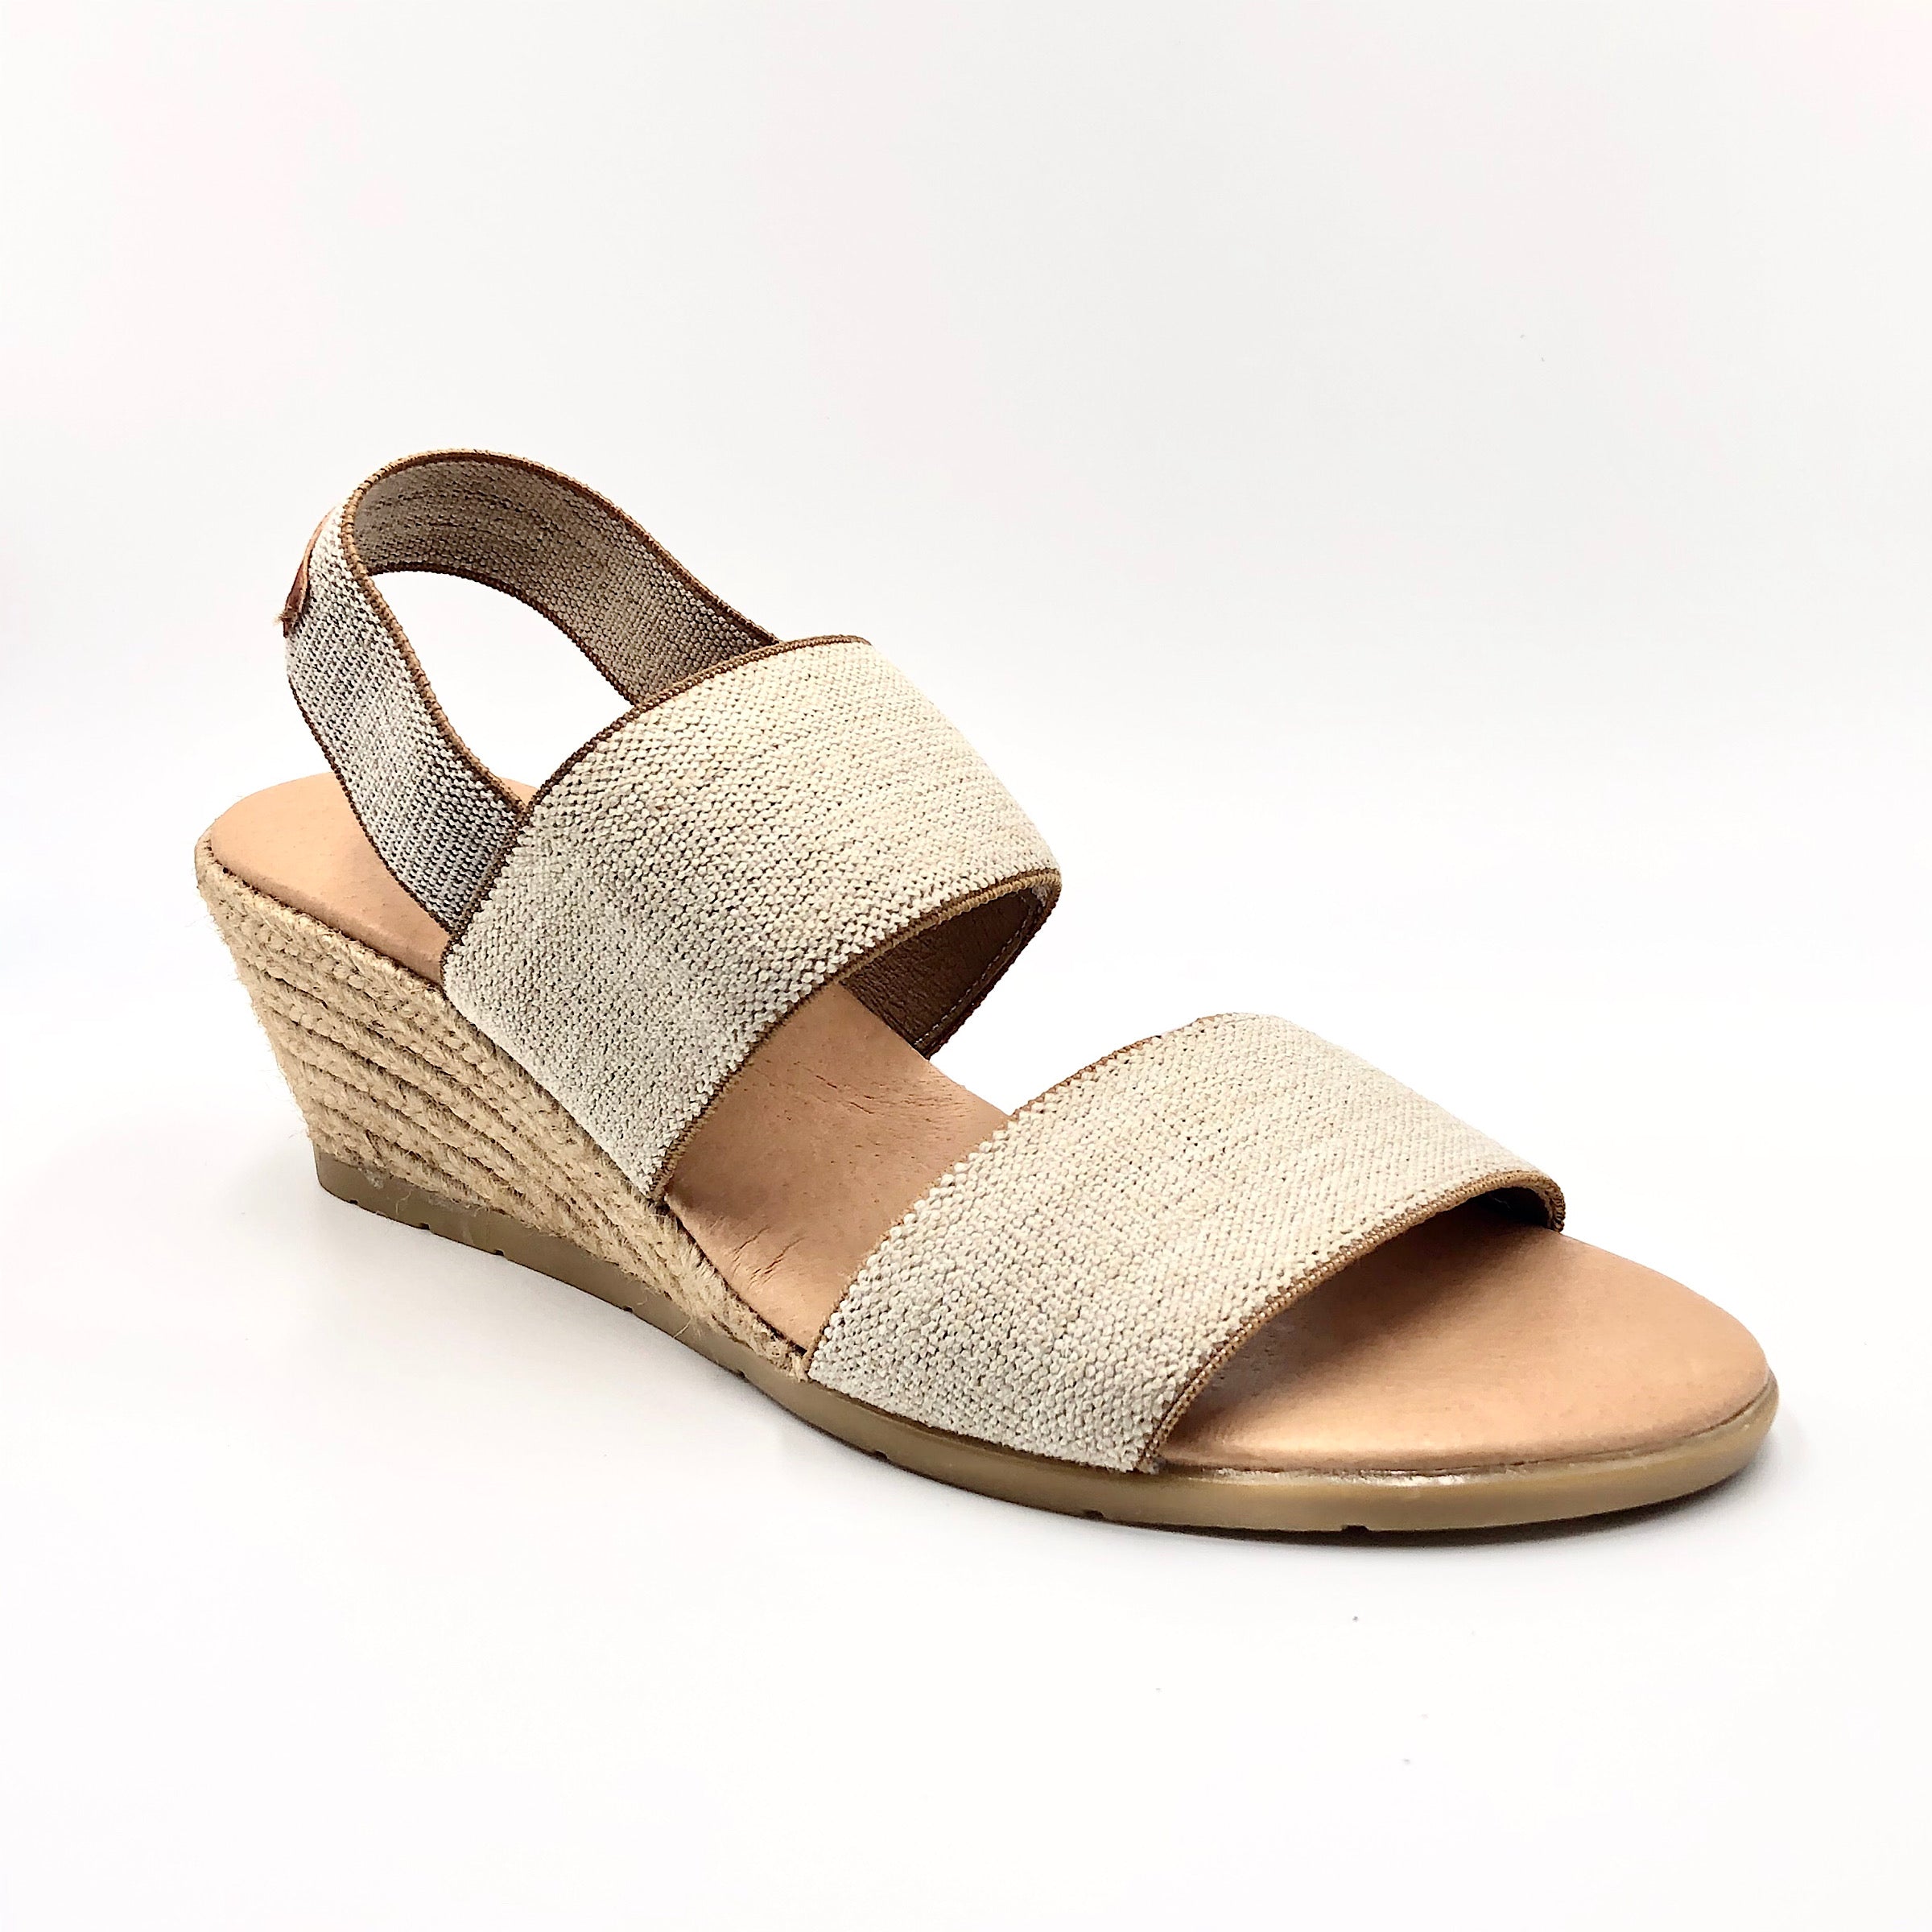 Betty - The Elastic 2 Band Espadrille in Natural Linen